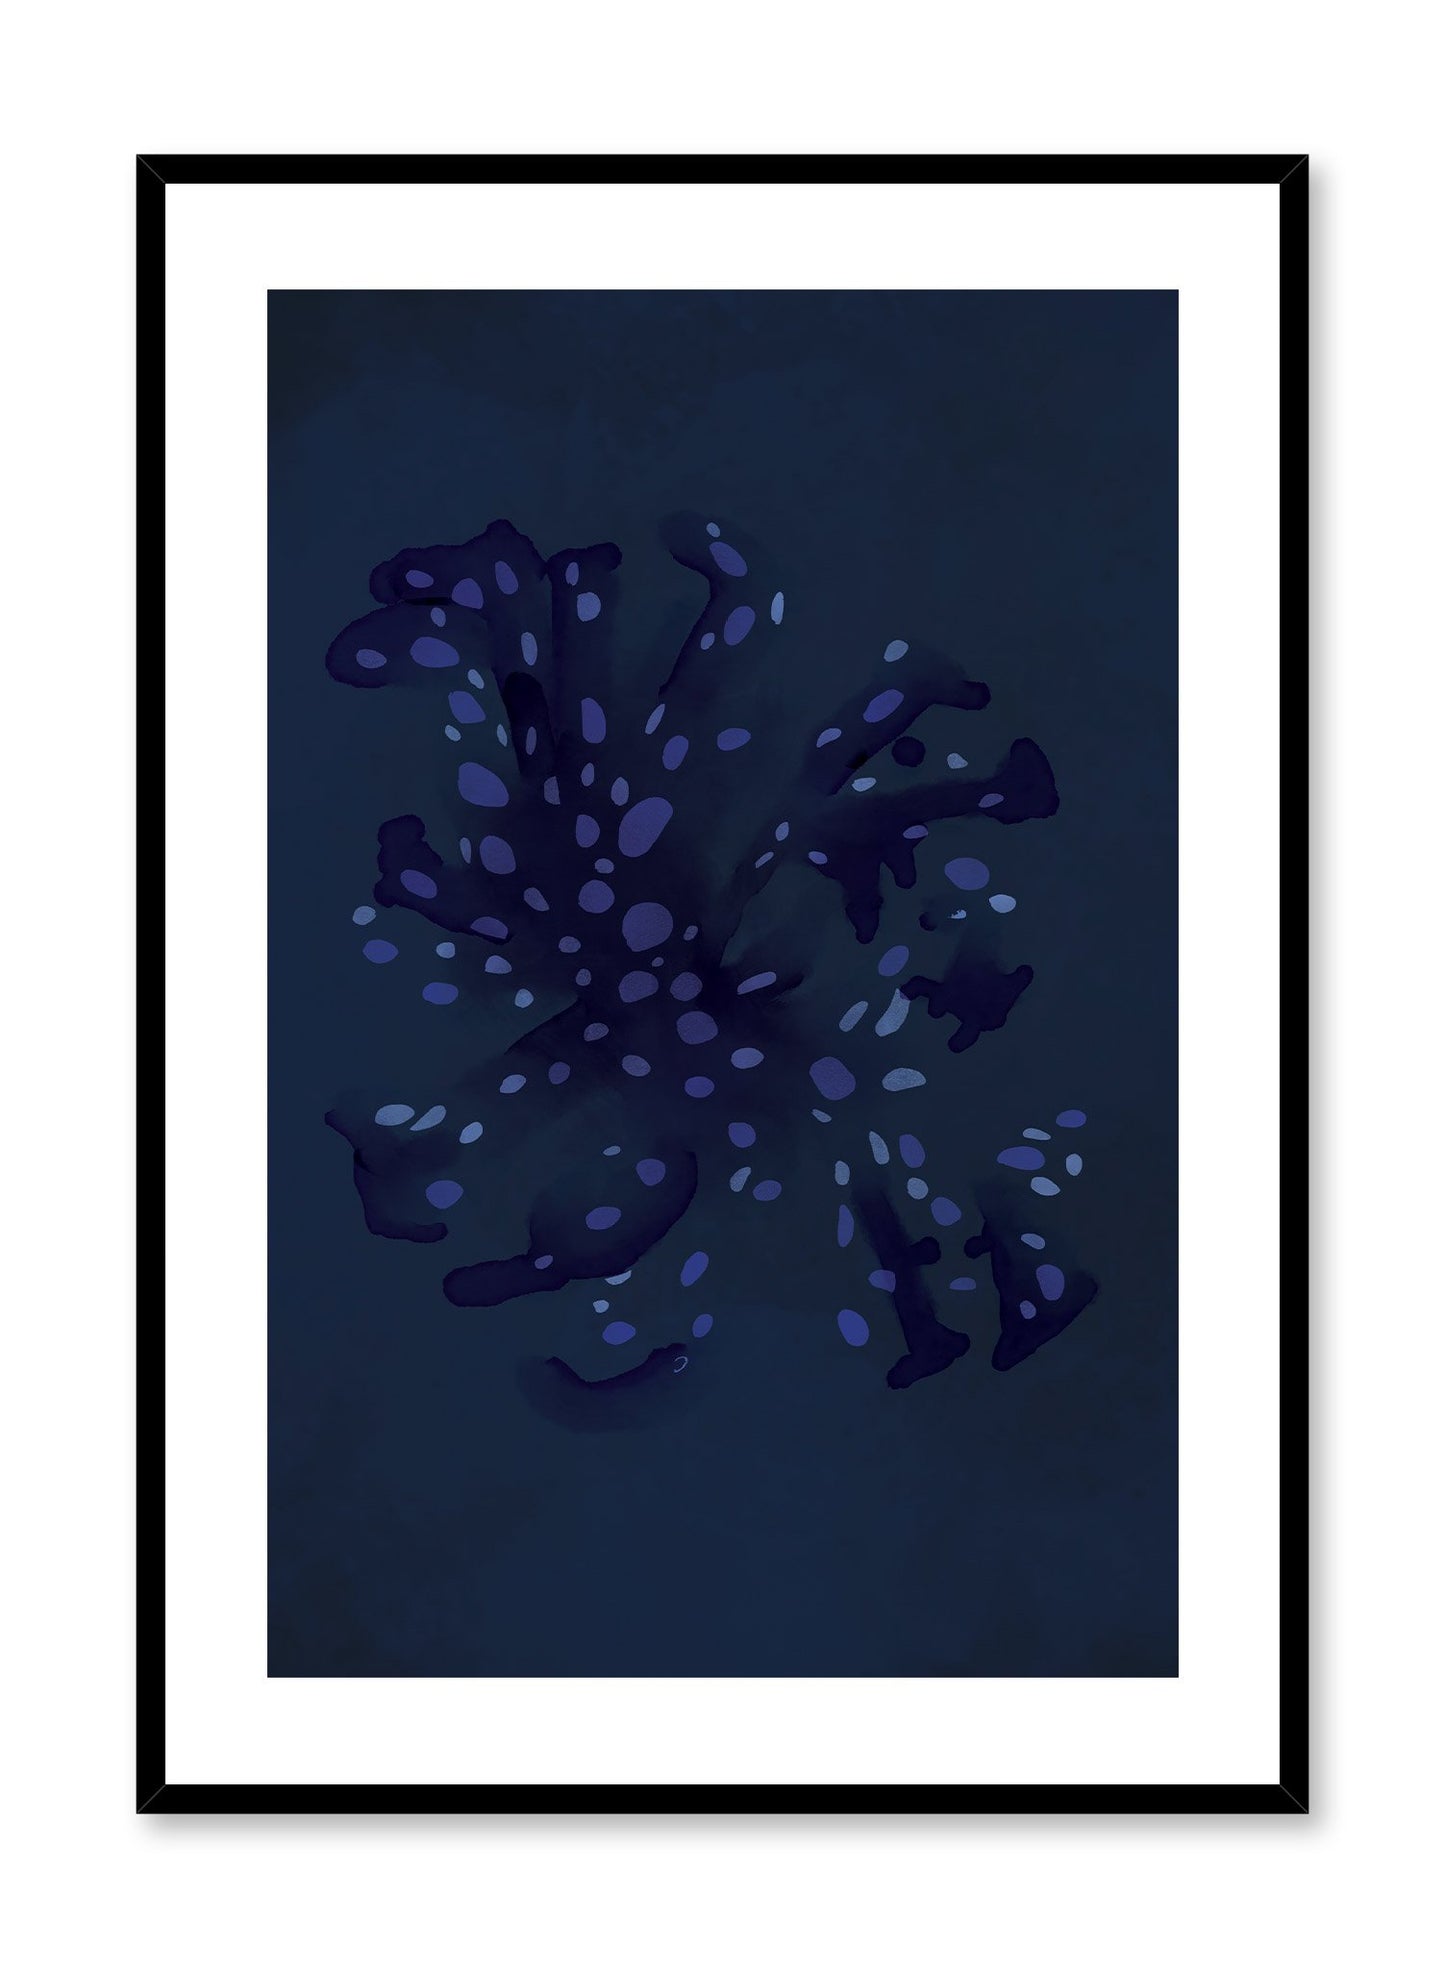 Marine Gem is a minimalist illustration of a deep sea blue coral reef with purple dots by Opposite Wall.